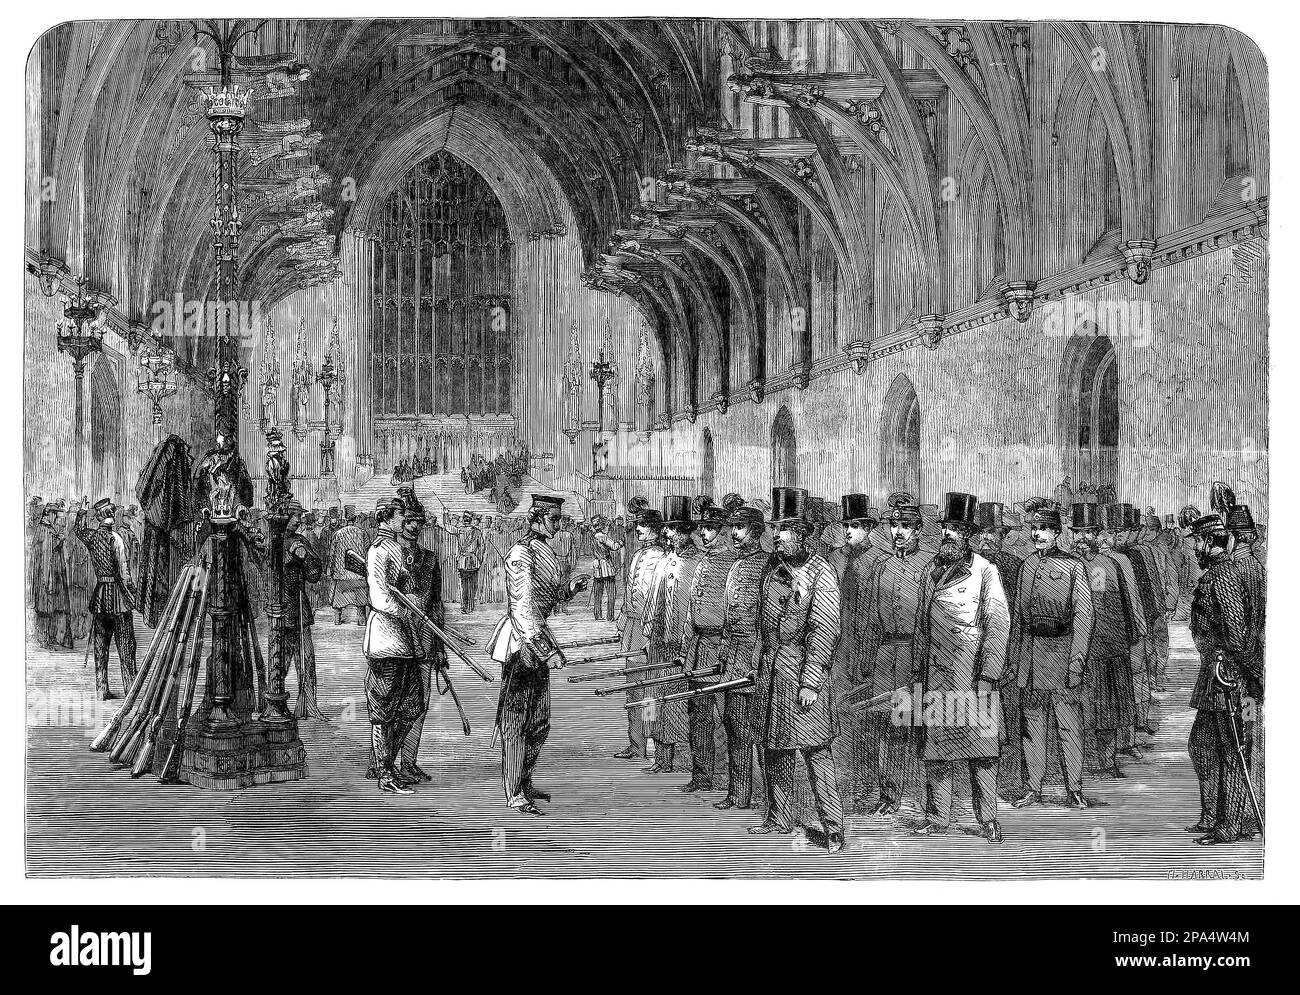 The Rifle Corps practising formal display in Westminster Hall, Westminster Hall, the oldest existing part of the Palace of Westminster, in London, England, erected in 1097 by King William II ('William Rufus'). Stock Photo